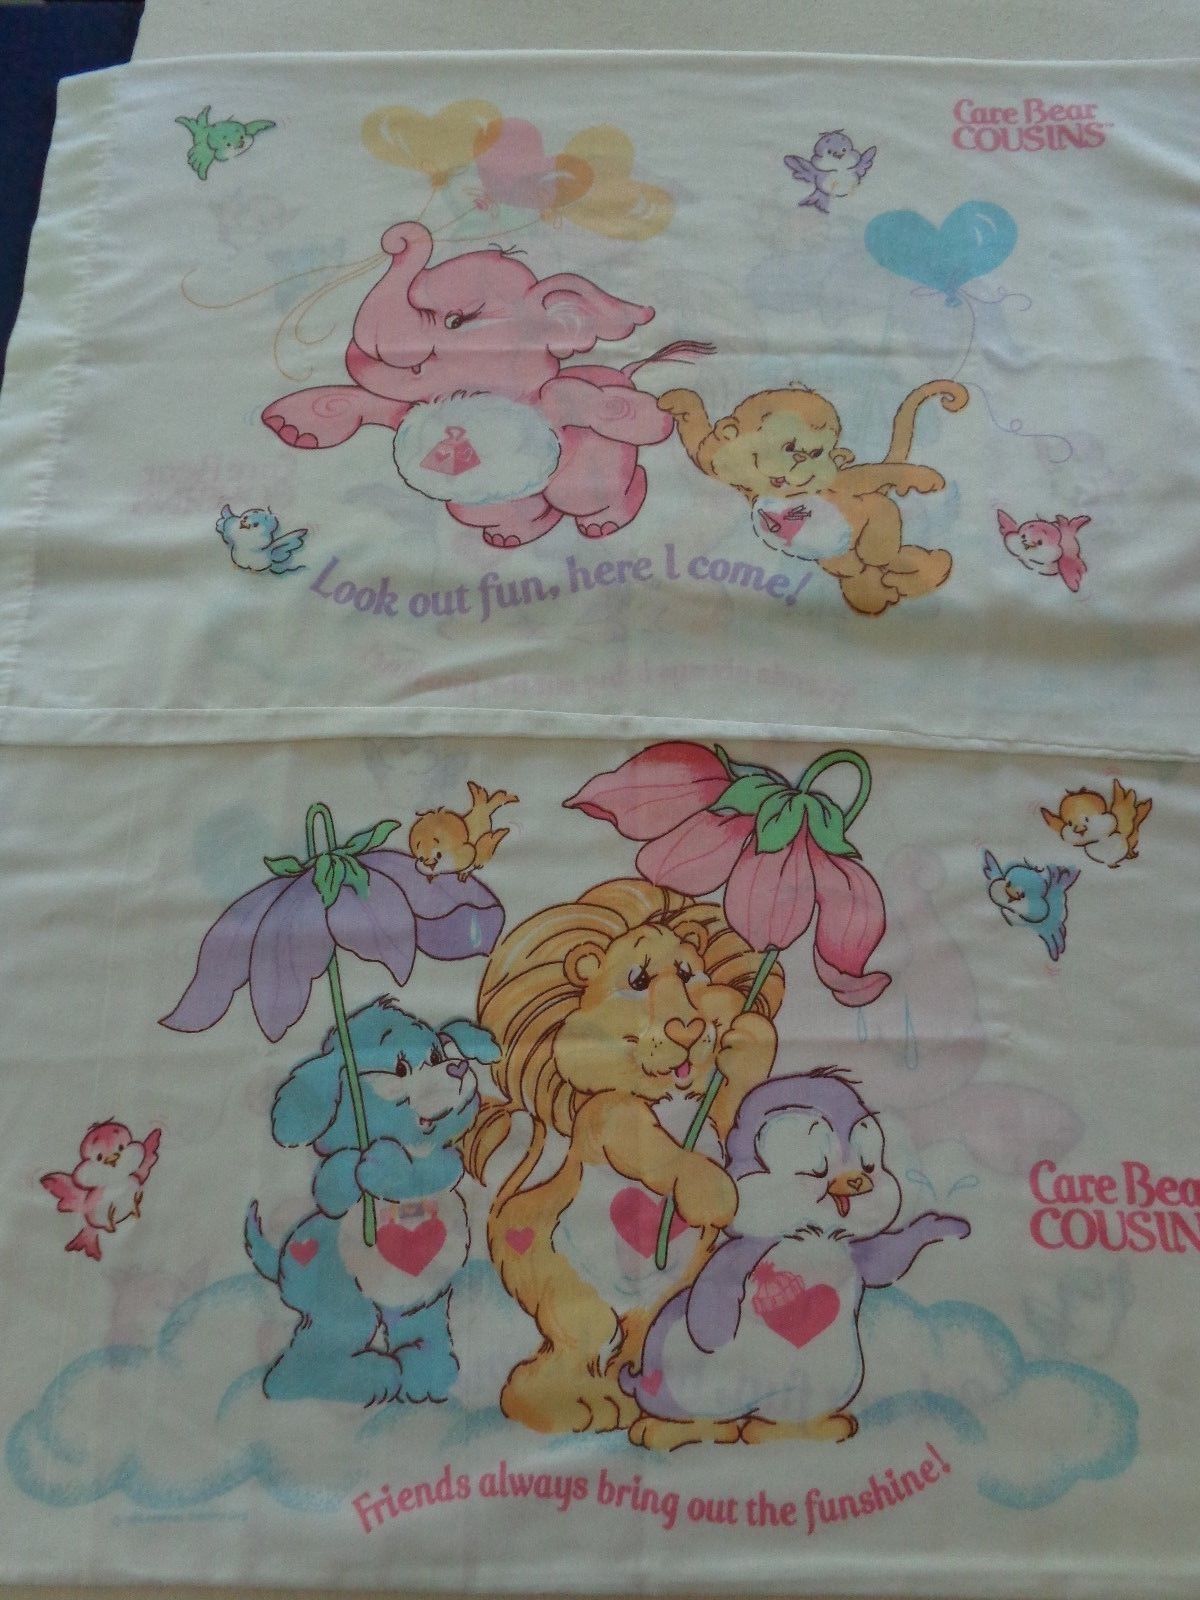 Vintage Care Bear Cousins Pillowcase Lot of 2 ~ American Greetings Corp.  1985